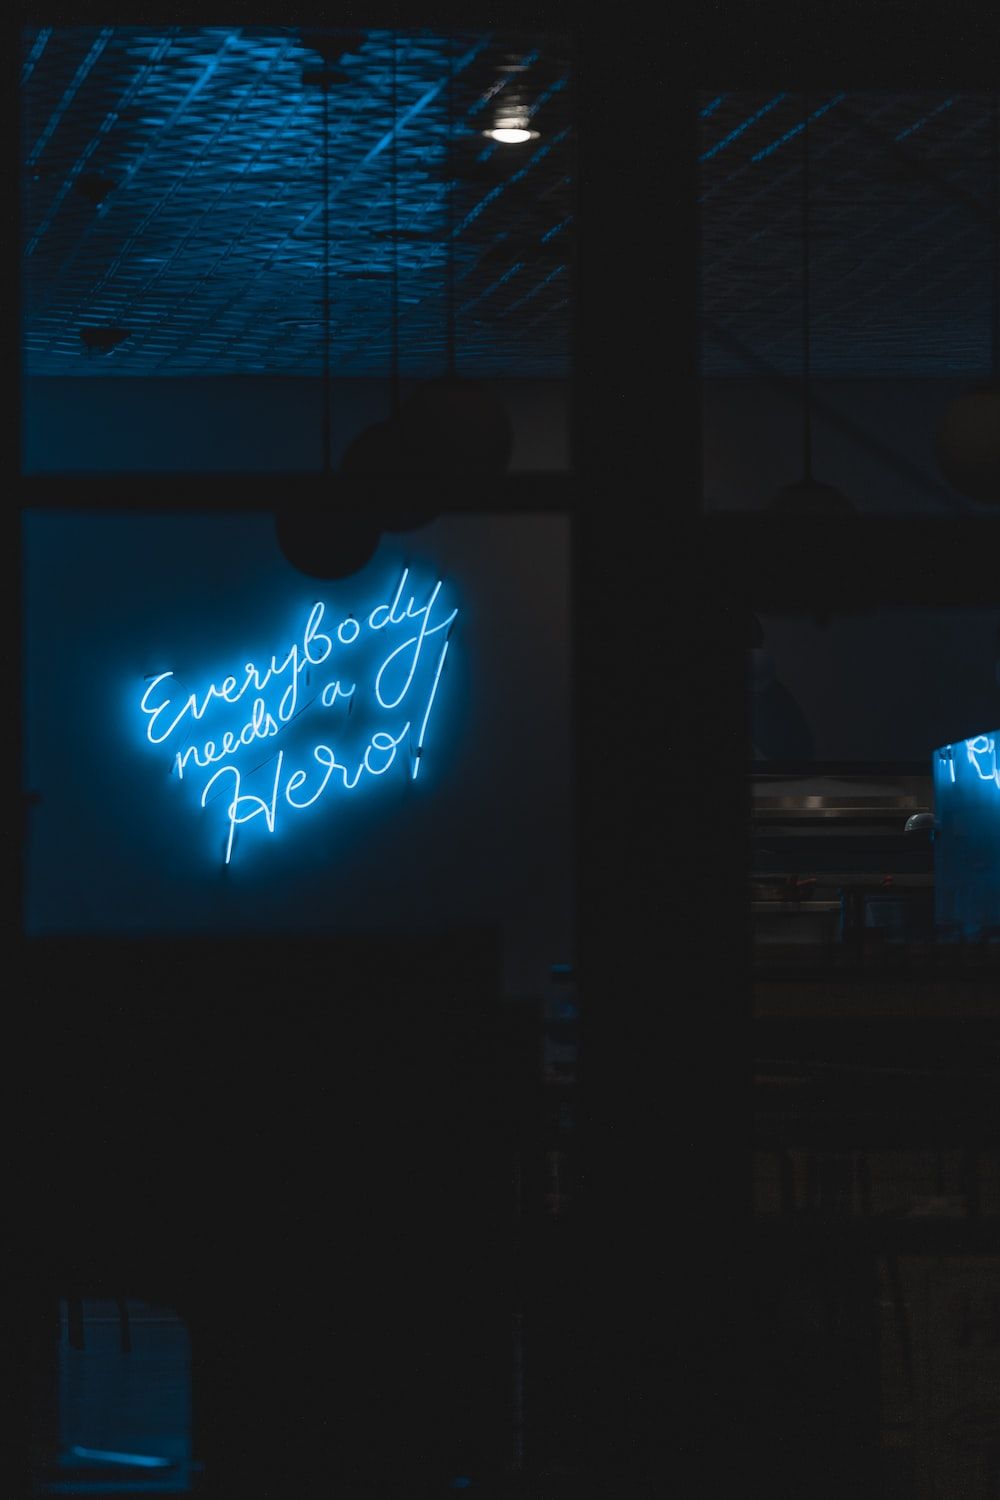 A neon sign that says everyone in here - Neon blue, dark blue